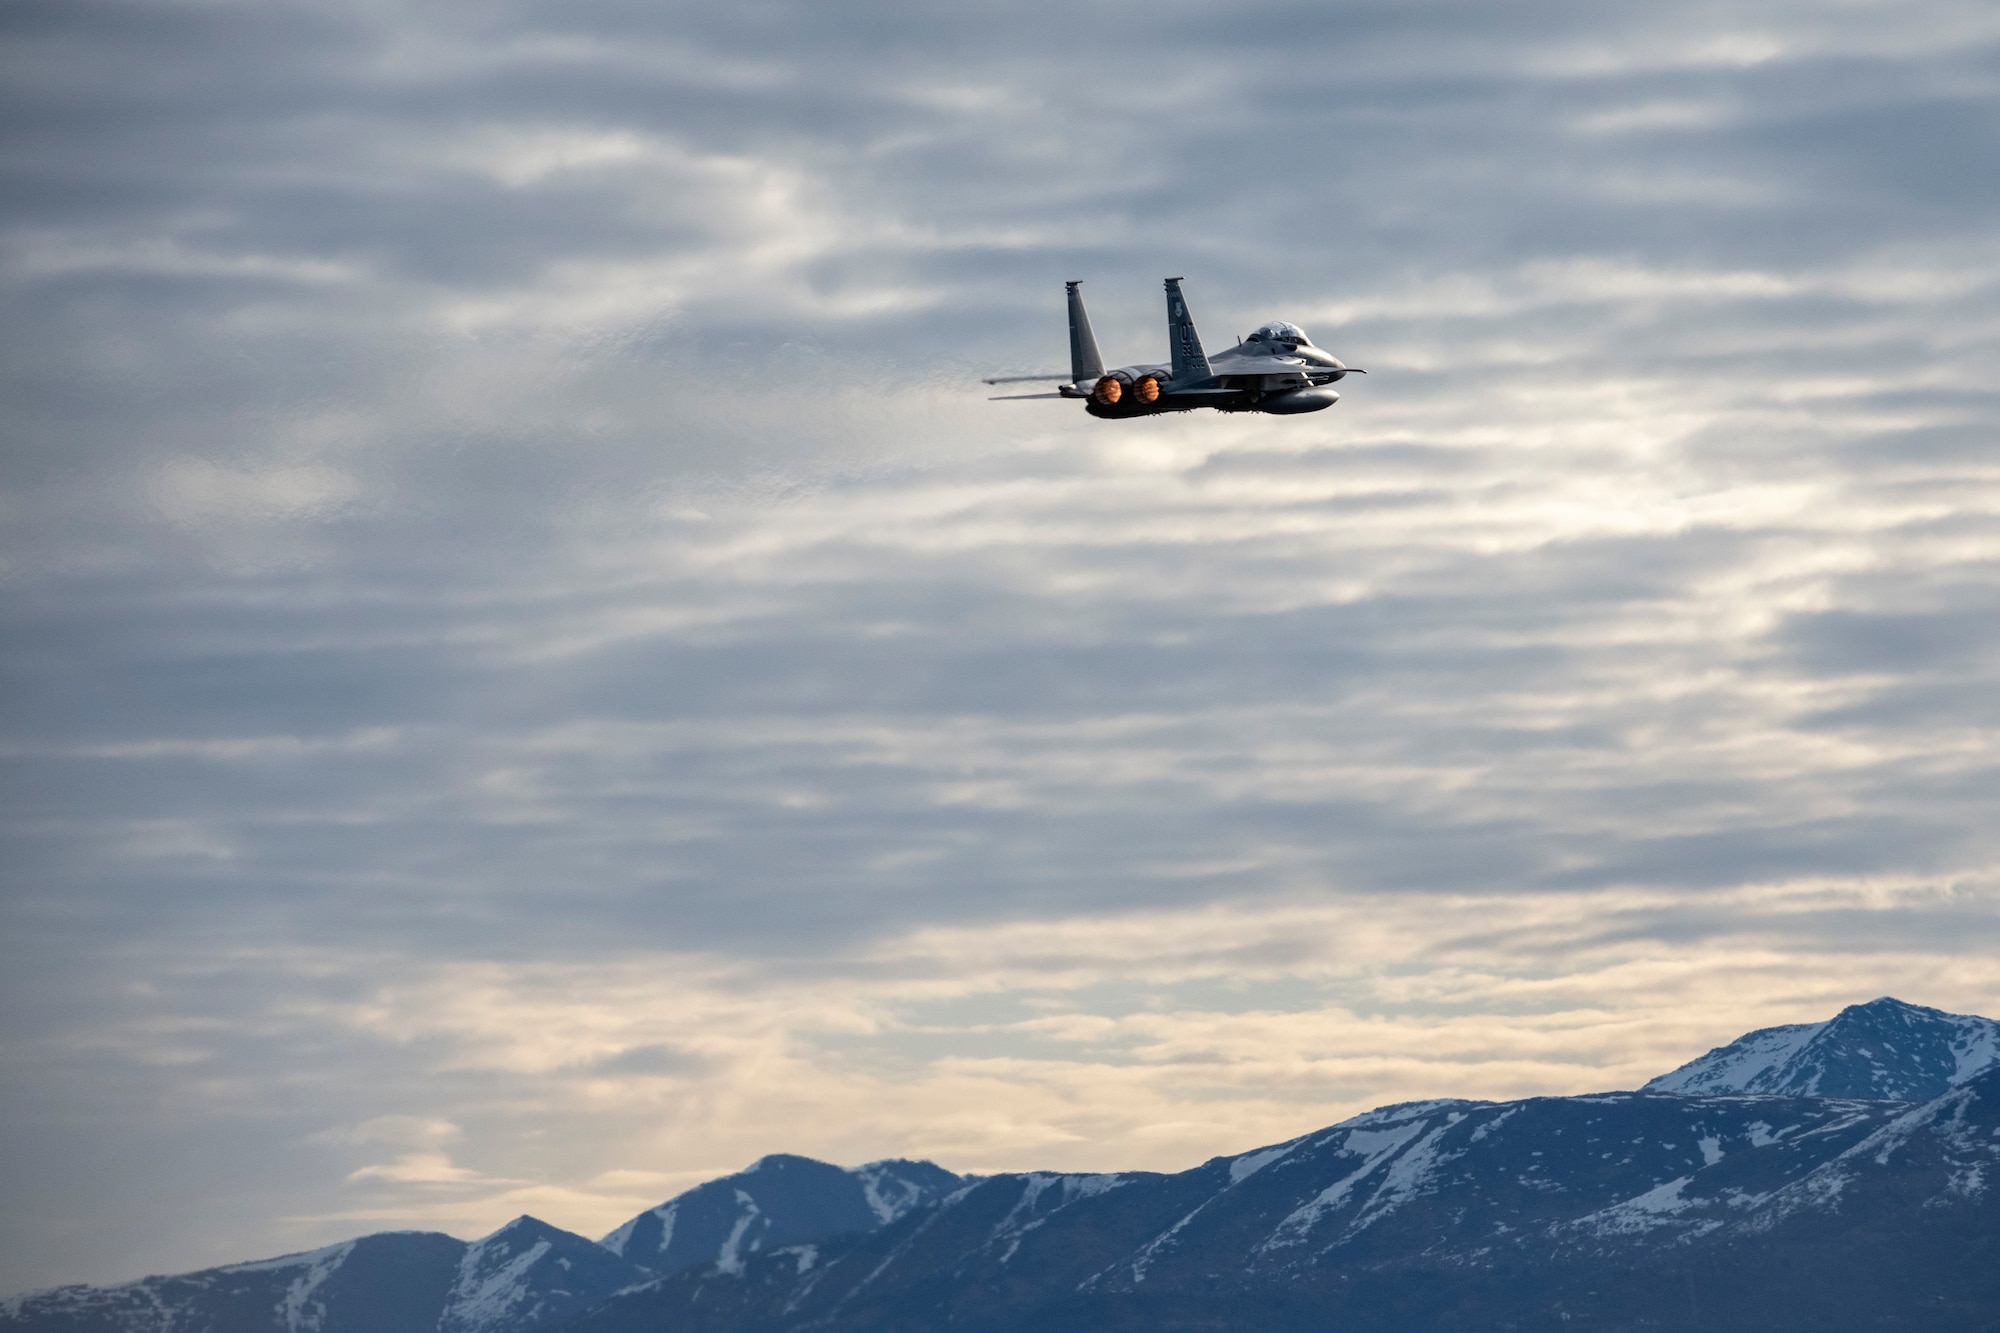 A U.S. Air Force F-15EX Eagle assigned to the 53rd Wing out of Eglin Air Force Base, Fla., takes off in support of Northern Edge 21 at Joint Base Elmendorf-Richardson, Alaska, May 12, 2021. Approximately 15,000 U.S. service members participate in a joint training exercise hosted by U.S. Pacific Air Forces May 3-14, 2021, on and above the Joint Pacific Alaska Range Complex, the Gulf of Alaska, and temporary maritime activities area. NE21 is one in a series of U.S. Indo-Pacific Command exercises designed to sharpen the joint forces' skills, practice tactics, techniques, and procedures, improve command, control, and communication relationships develop cooperative plans and programs. (U.S. Air Force photo by Alejandro Peña)